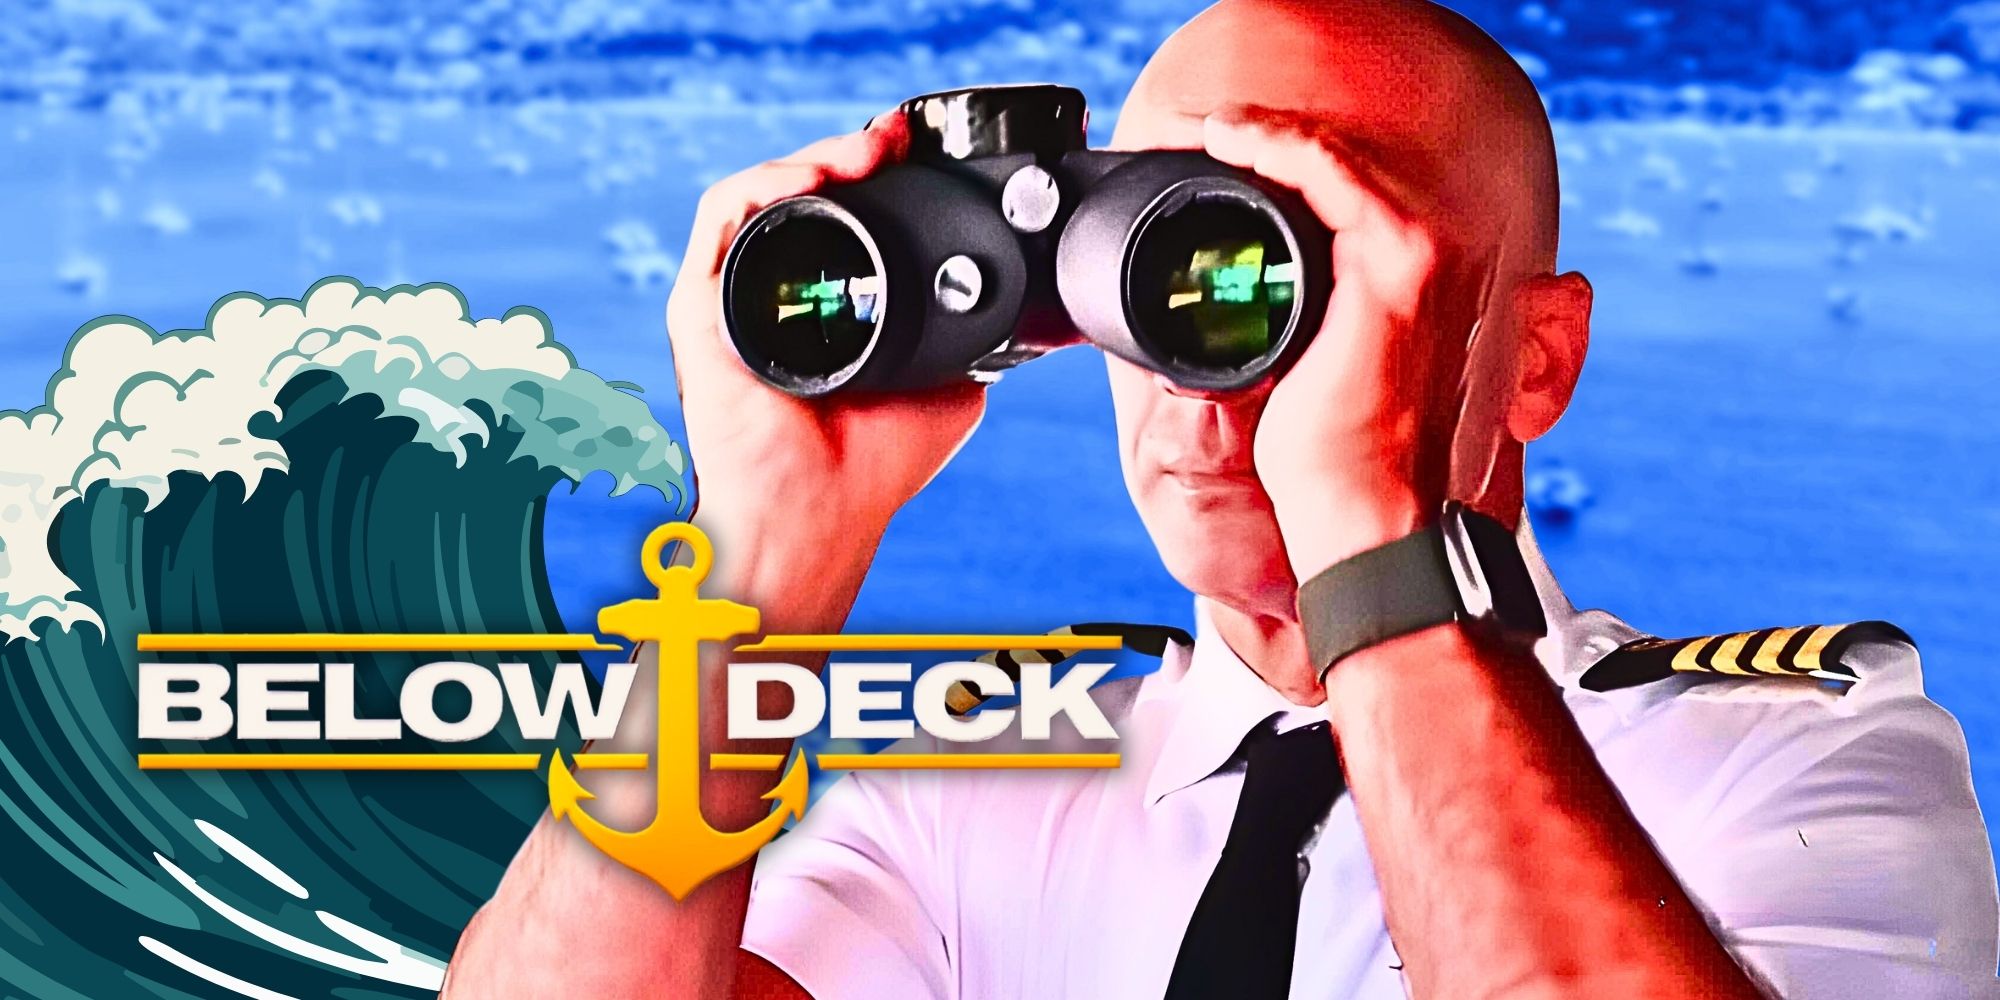 A Below Deck season 11 promo shows Captain Kerry looking through binoculars, with waves in the background and logo in the foreground.